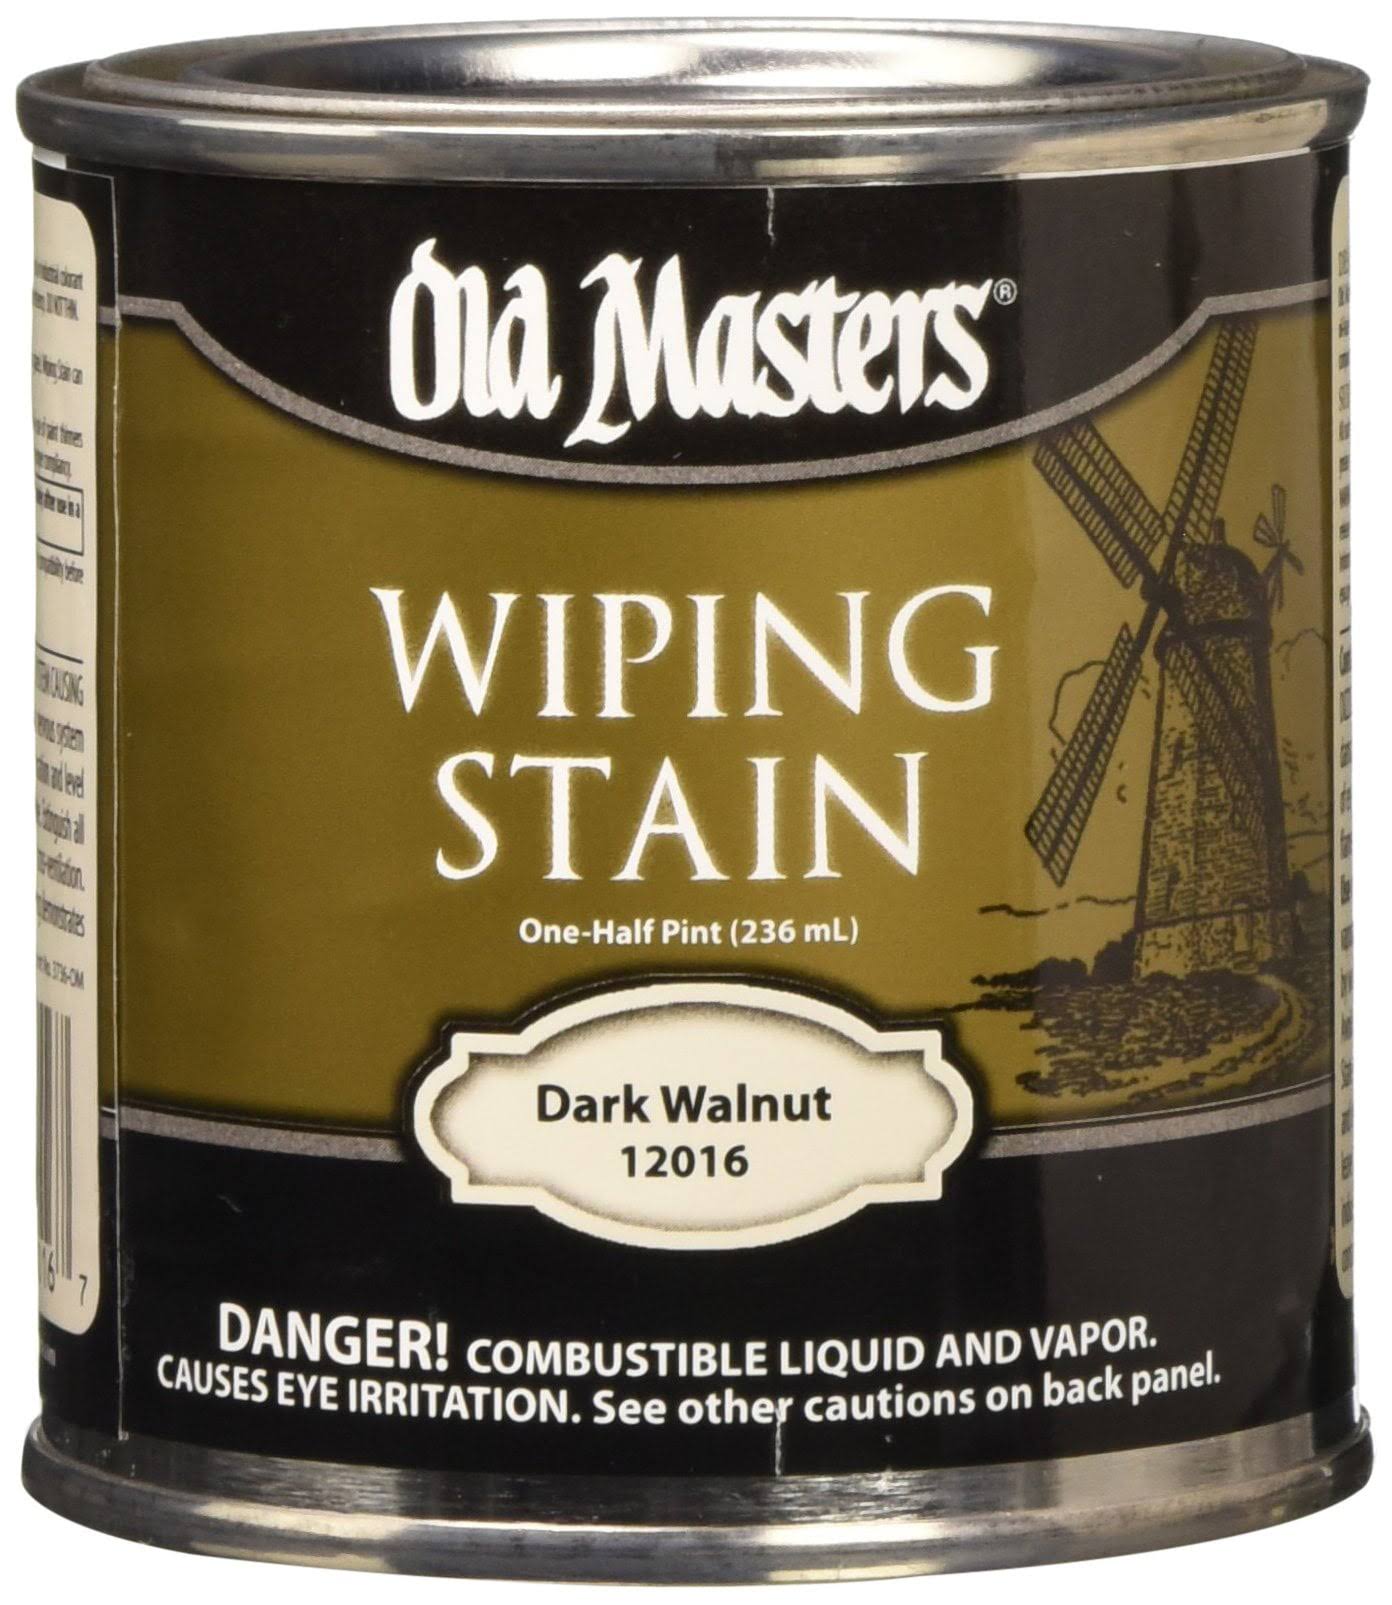 Old Masters 12016 Wiping Stain, Dark Walnut, 0.5 Pt Can